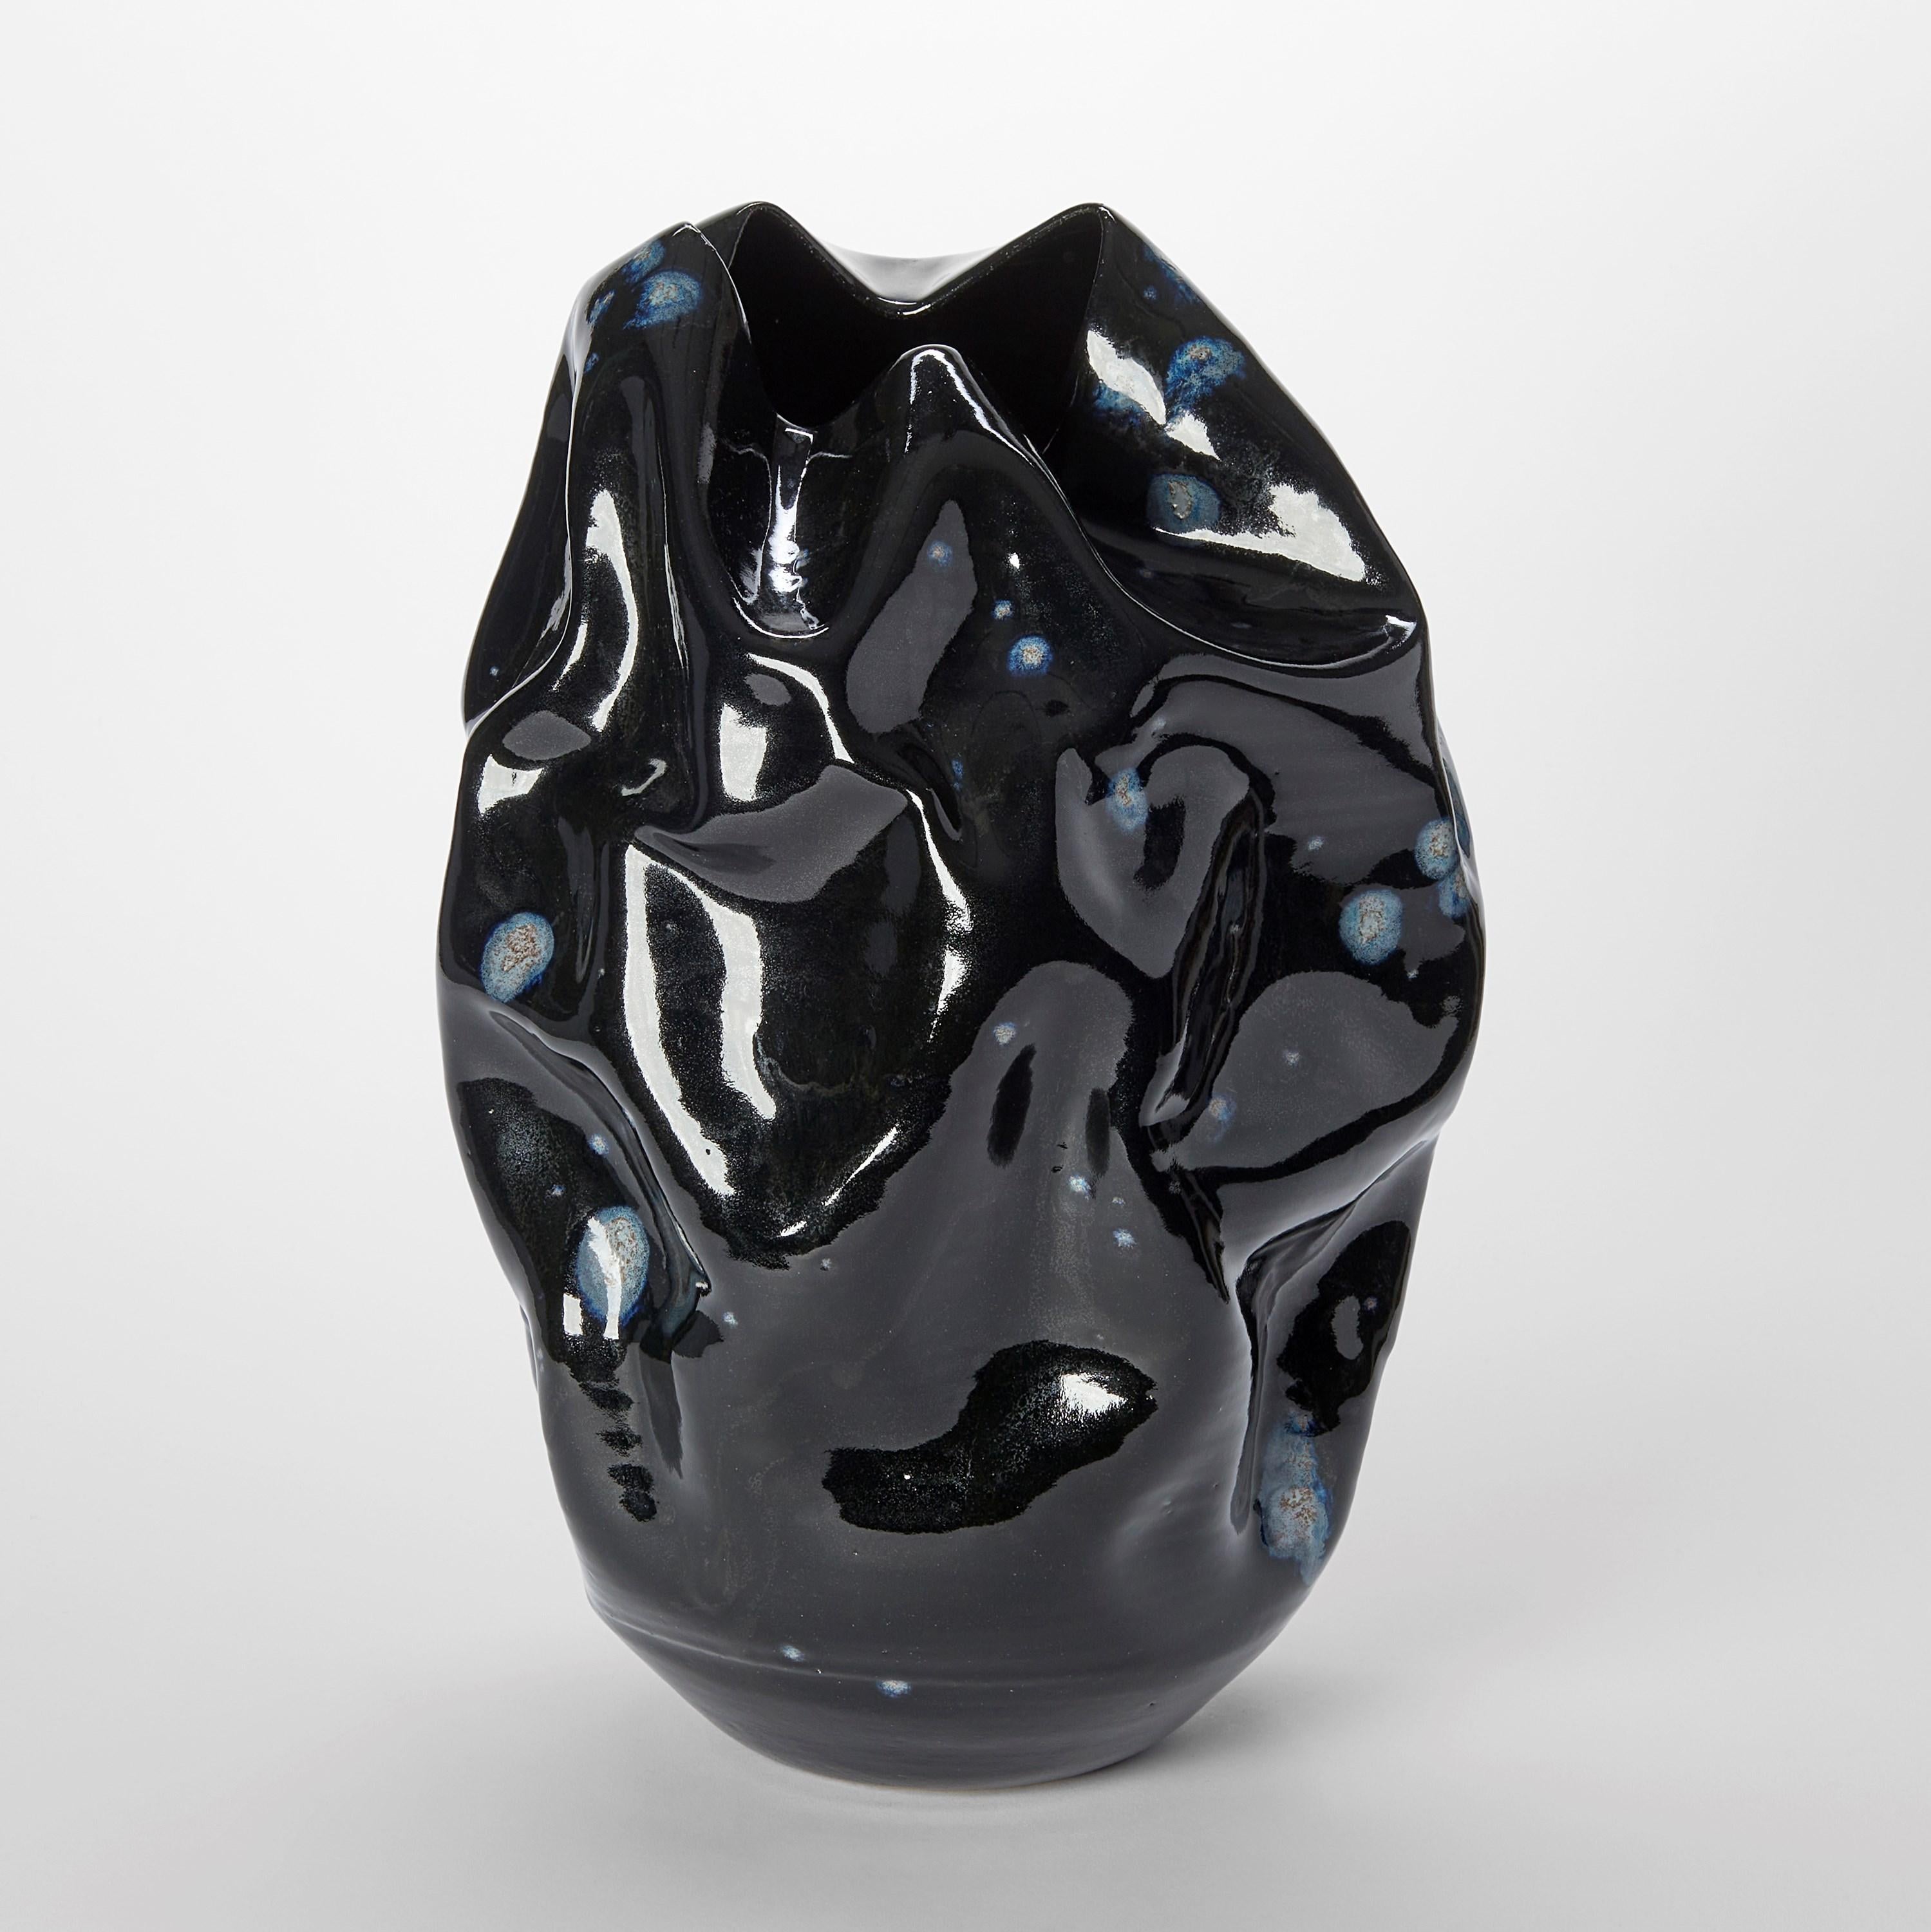 ‘Irregular Form with Cosmic Galactic Highlights No 121’ is a unique sculptural vessel by the British artist, Nicholas Arroyave-Portela.

Nicholas Arroyave-Portela’s professional ceramic practise began in 1994. After 20 years based in London, he